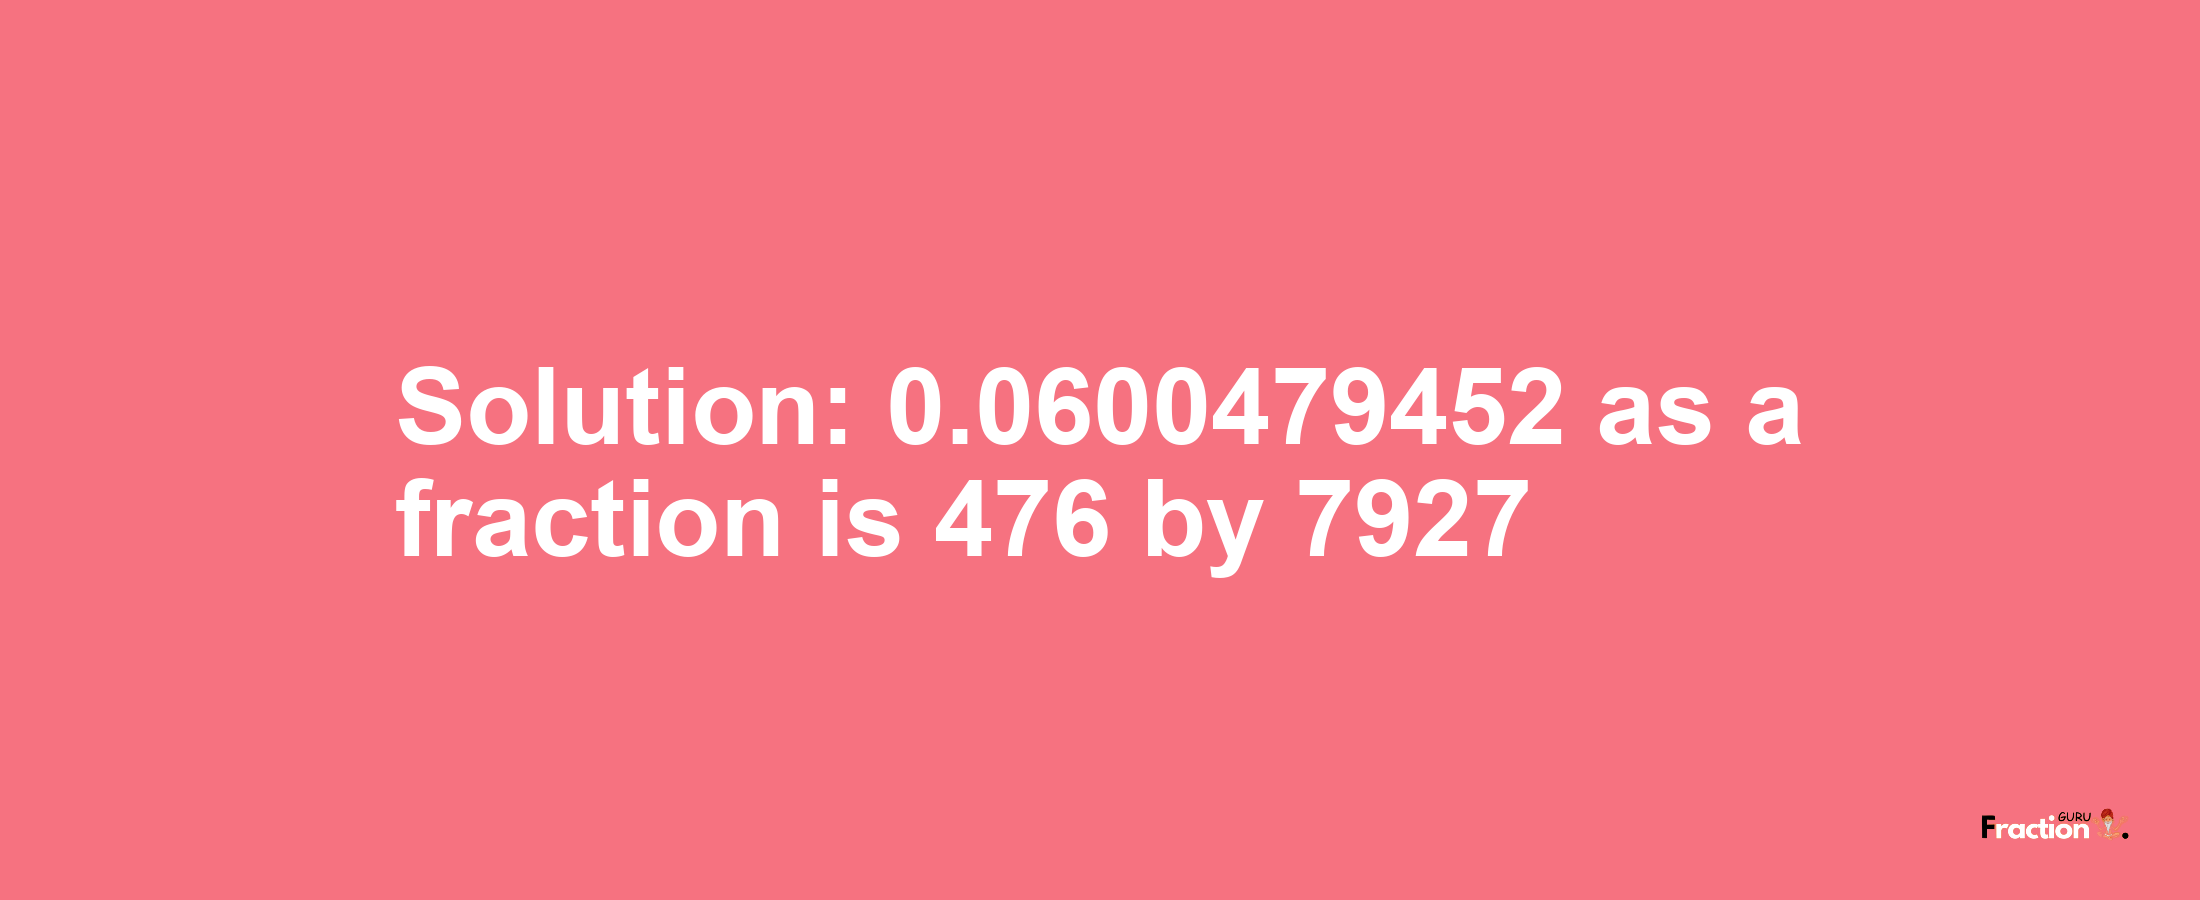 Solution:0.0600479452 as a fraction is 476/7927